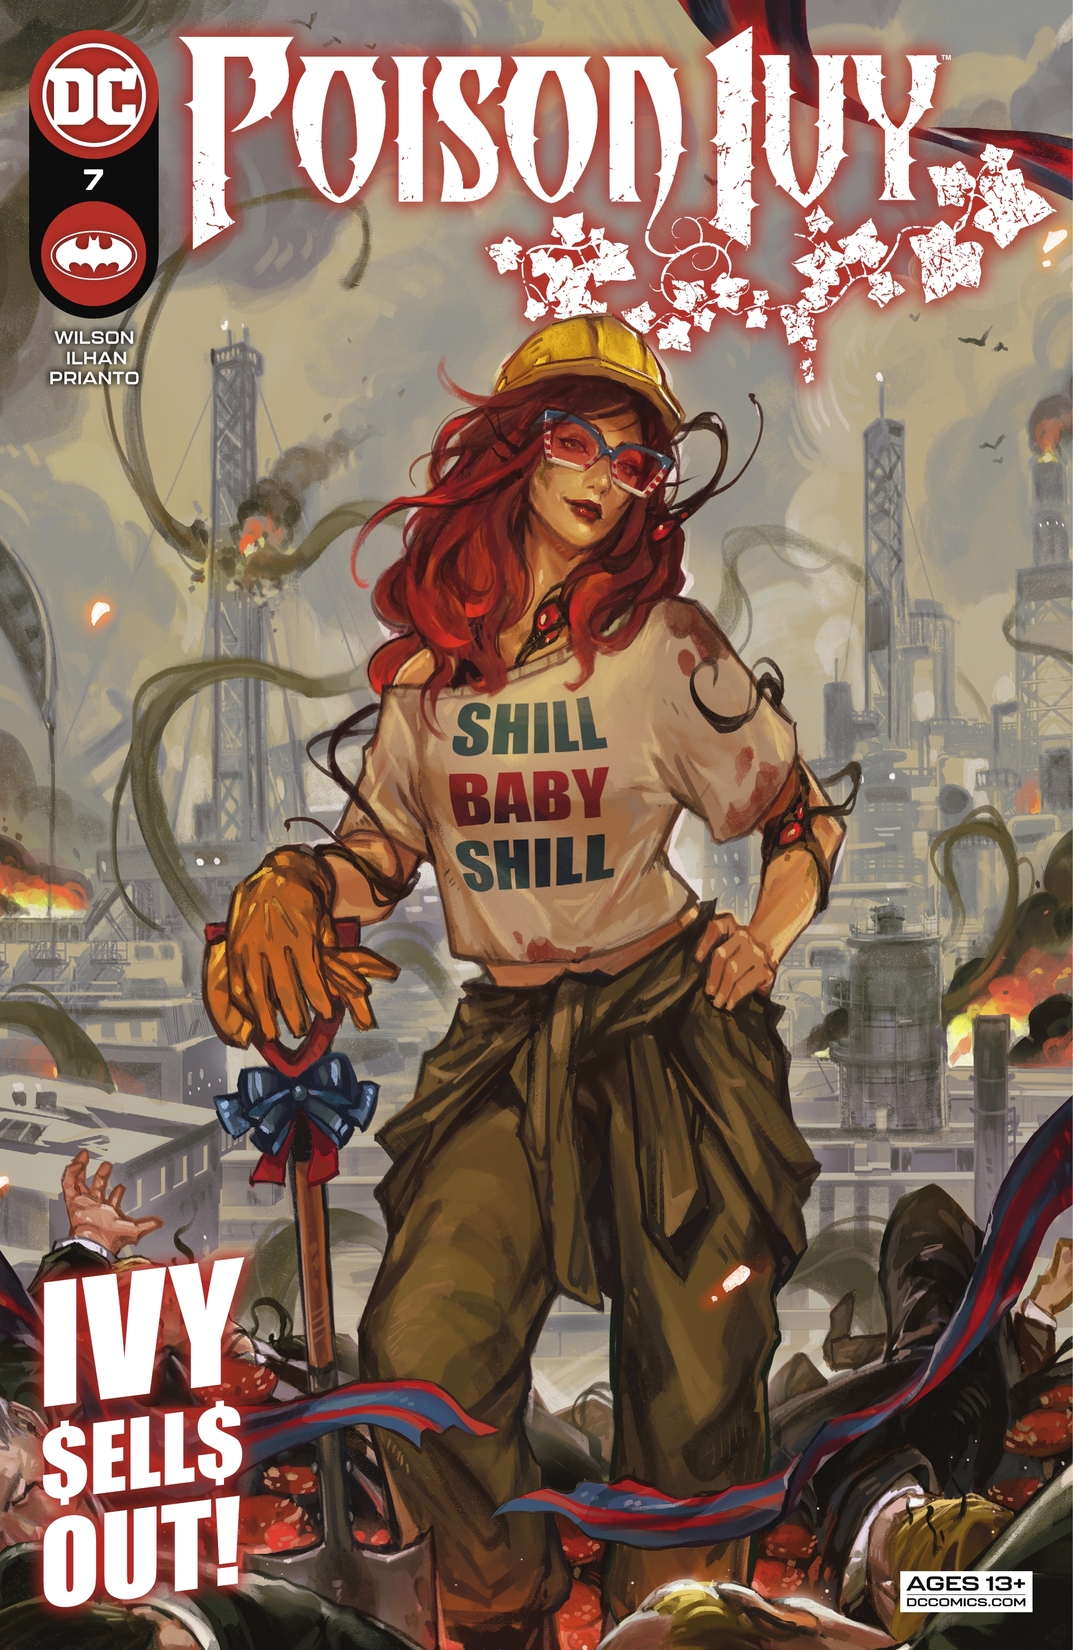 Poison Ivy #7 preview images